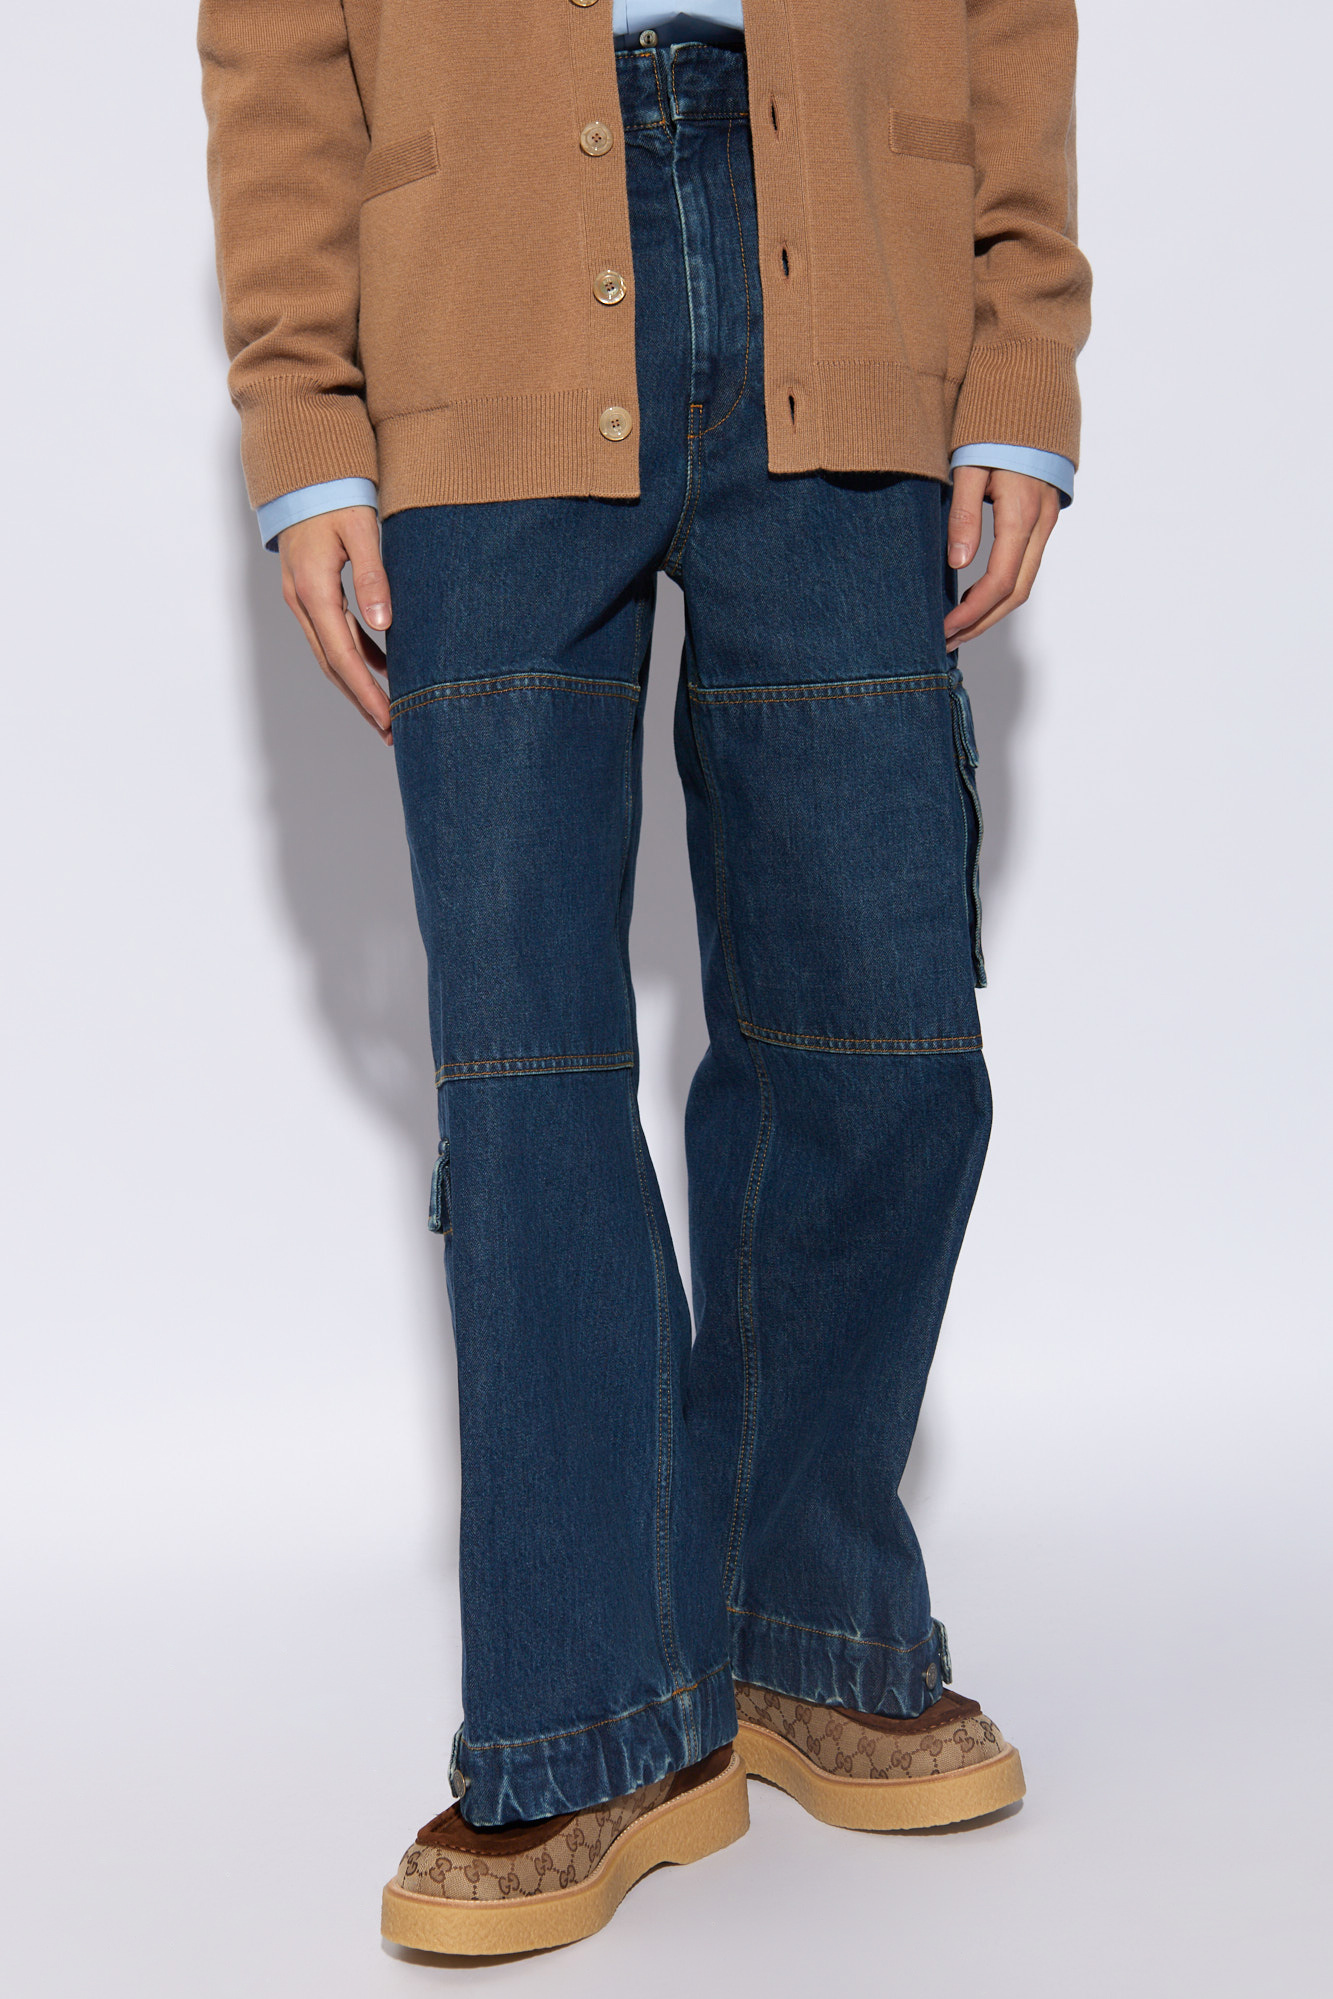 Gucci Cargo jeans